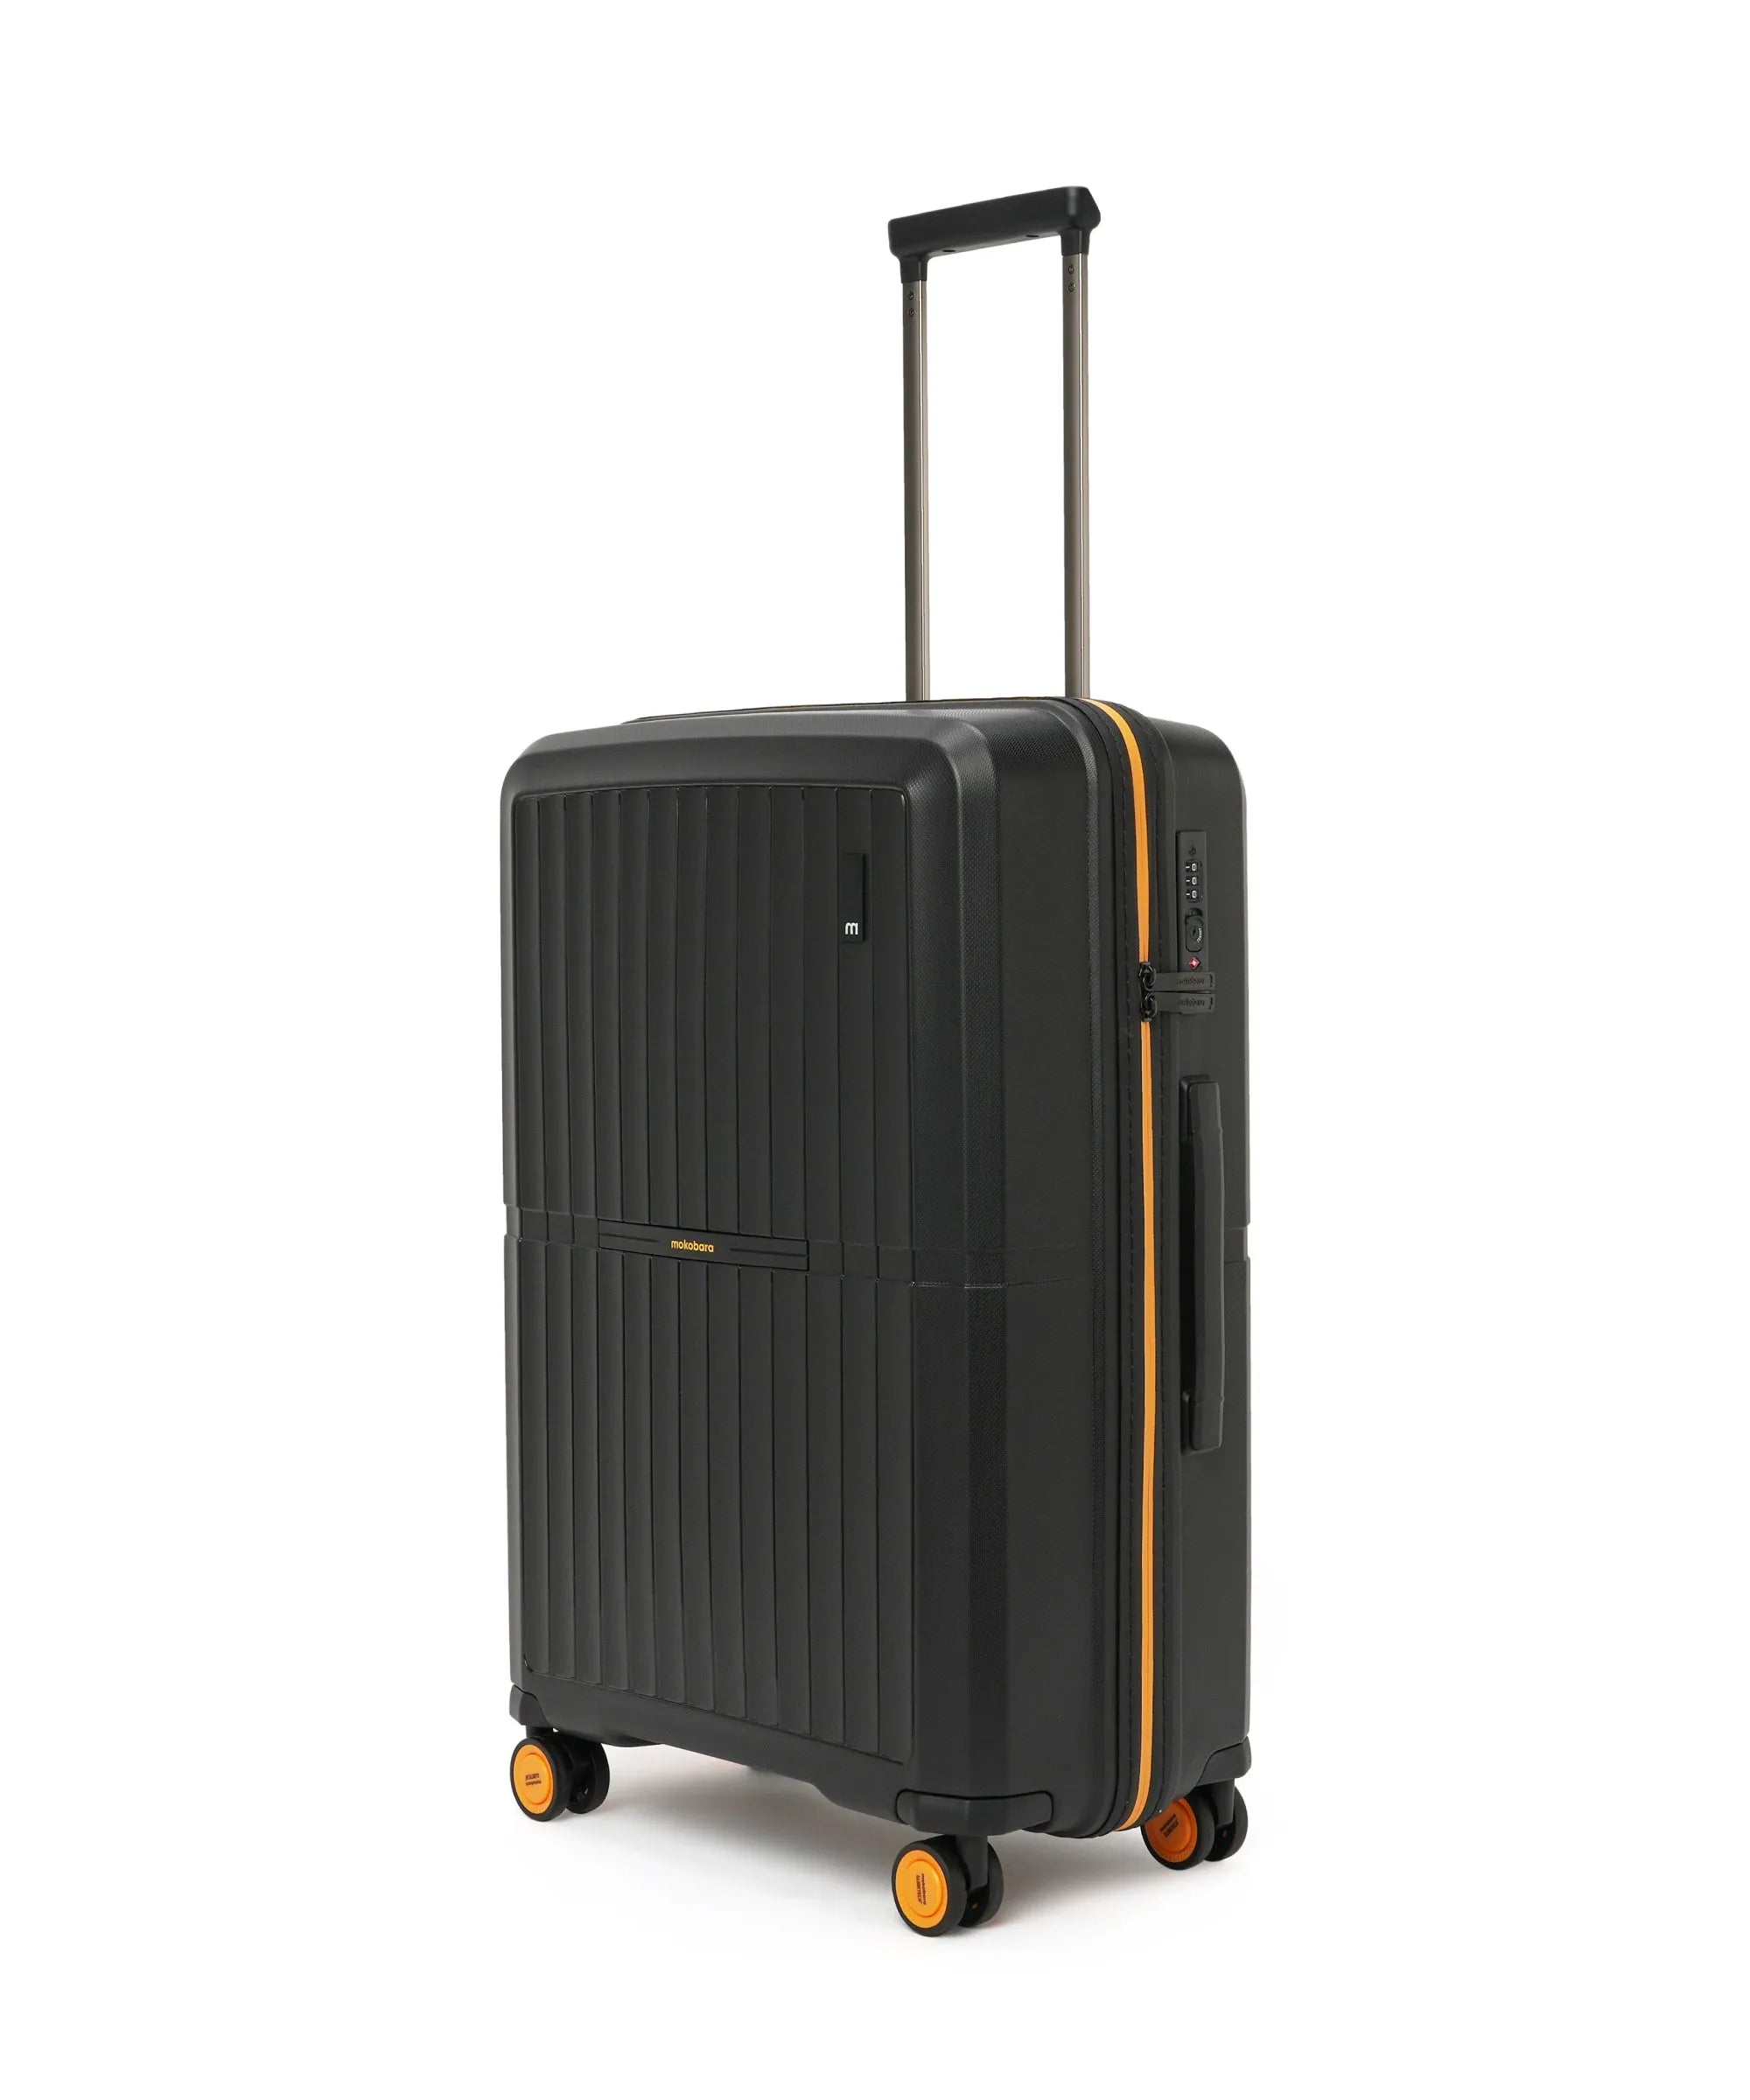 The Aviator Check-In Luggage